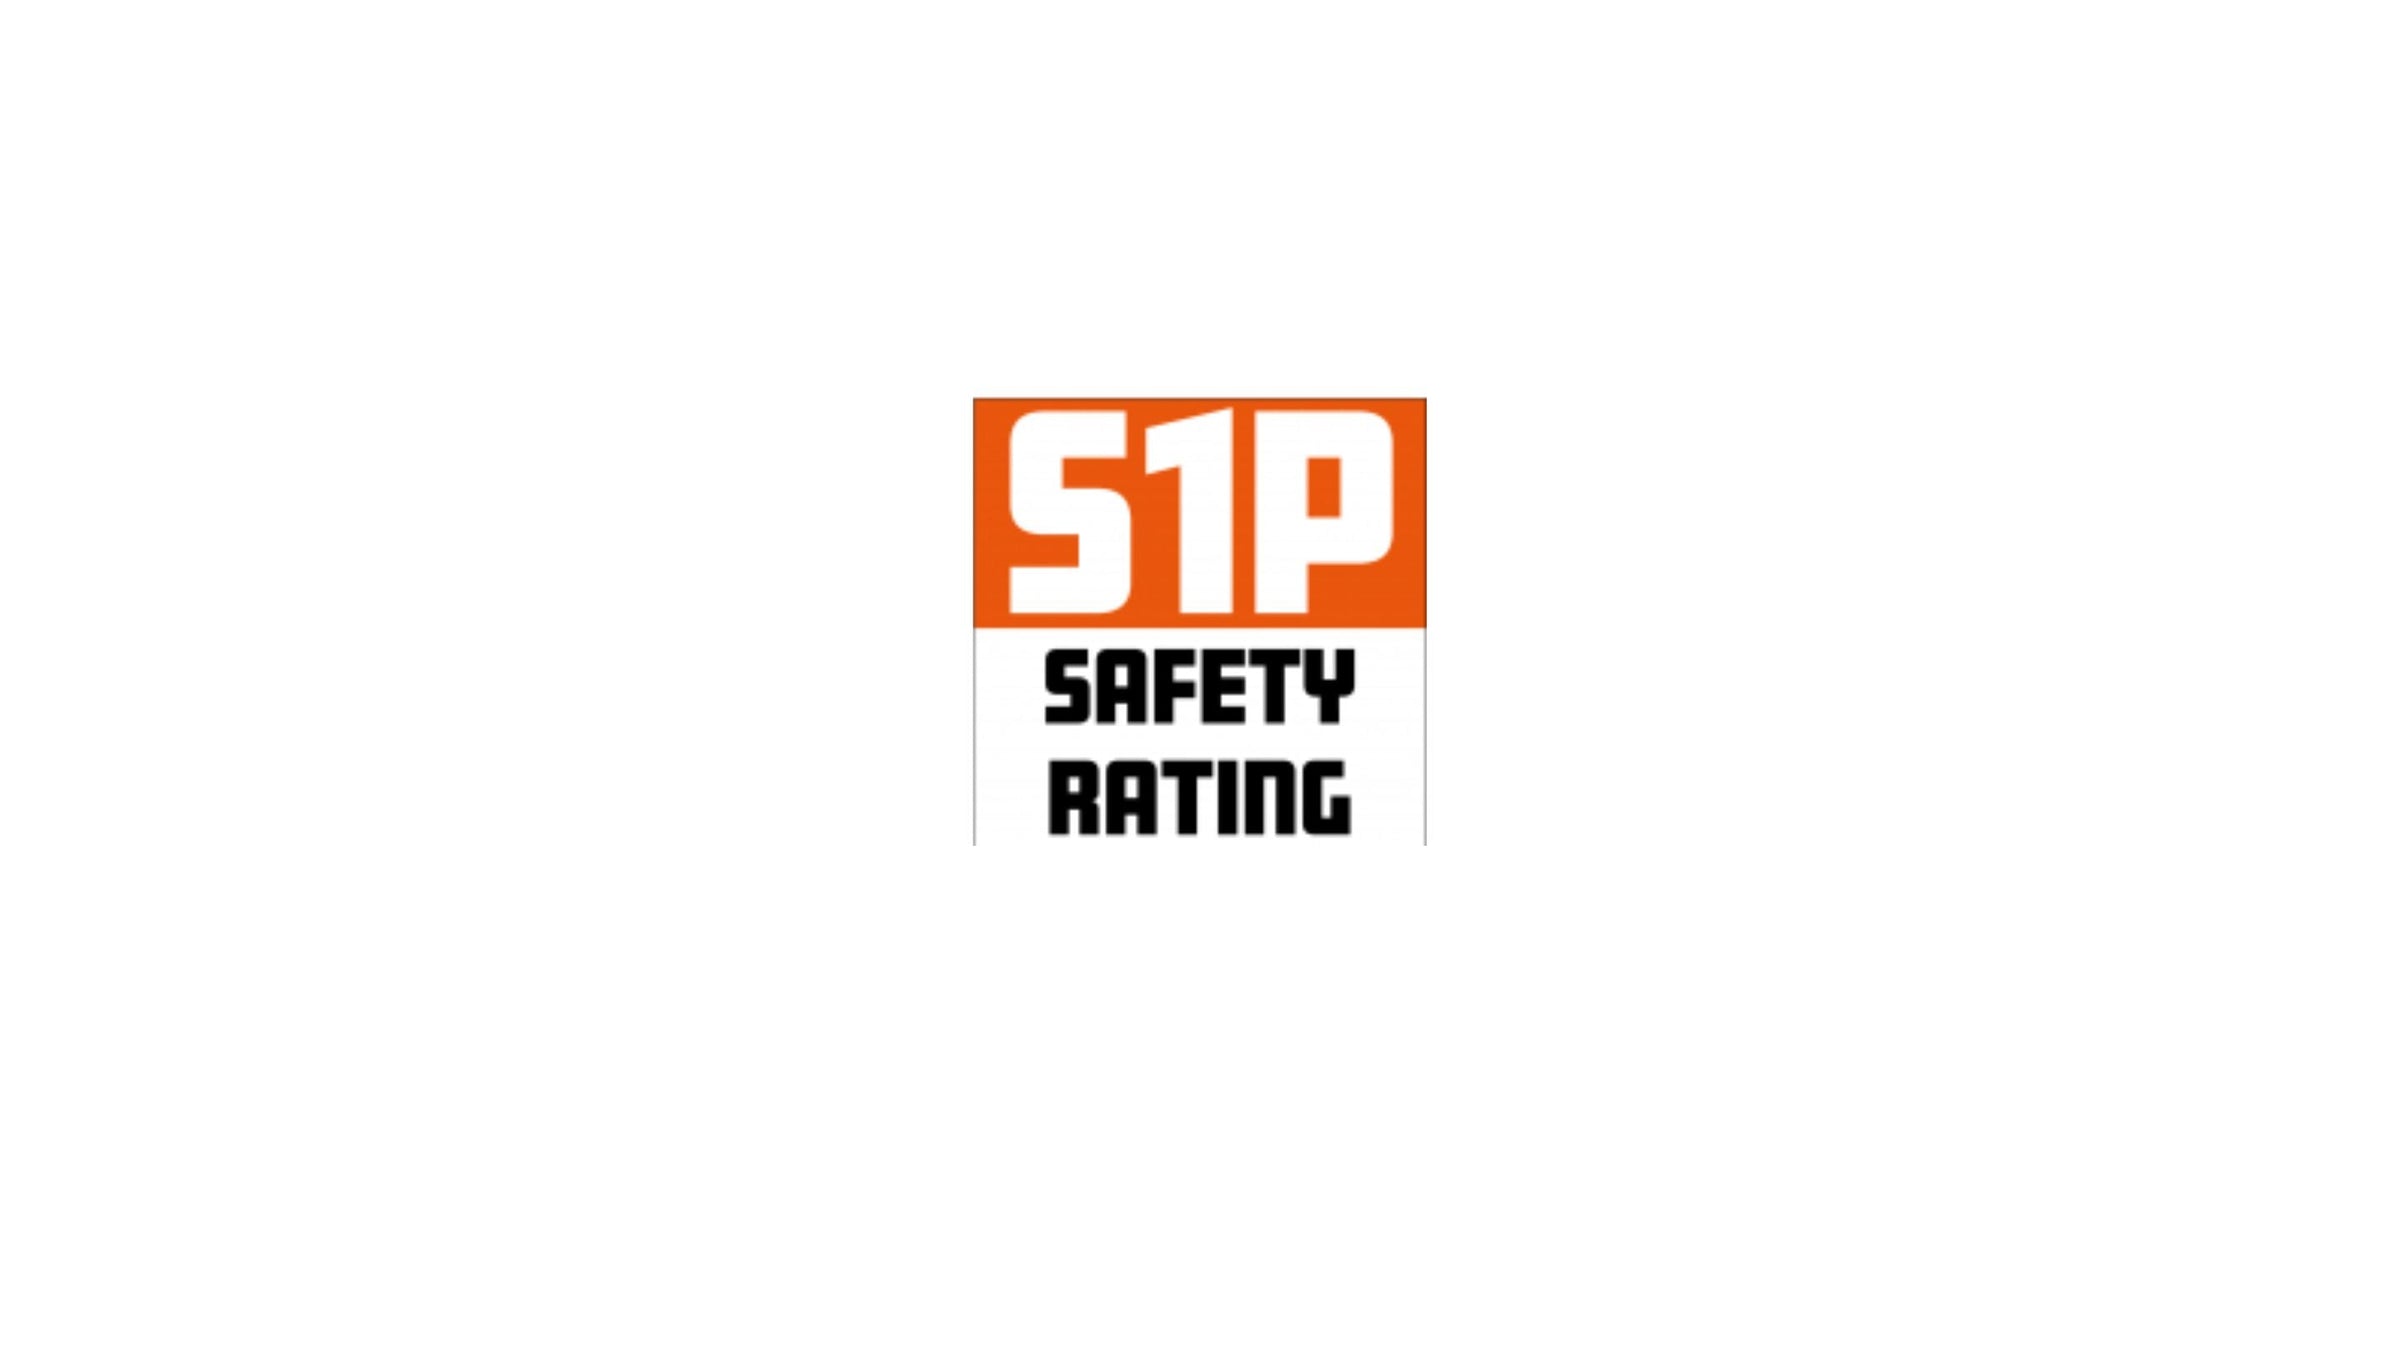 Image of the S1P Safety boots collection from Workwear Gurus